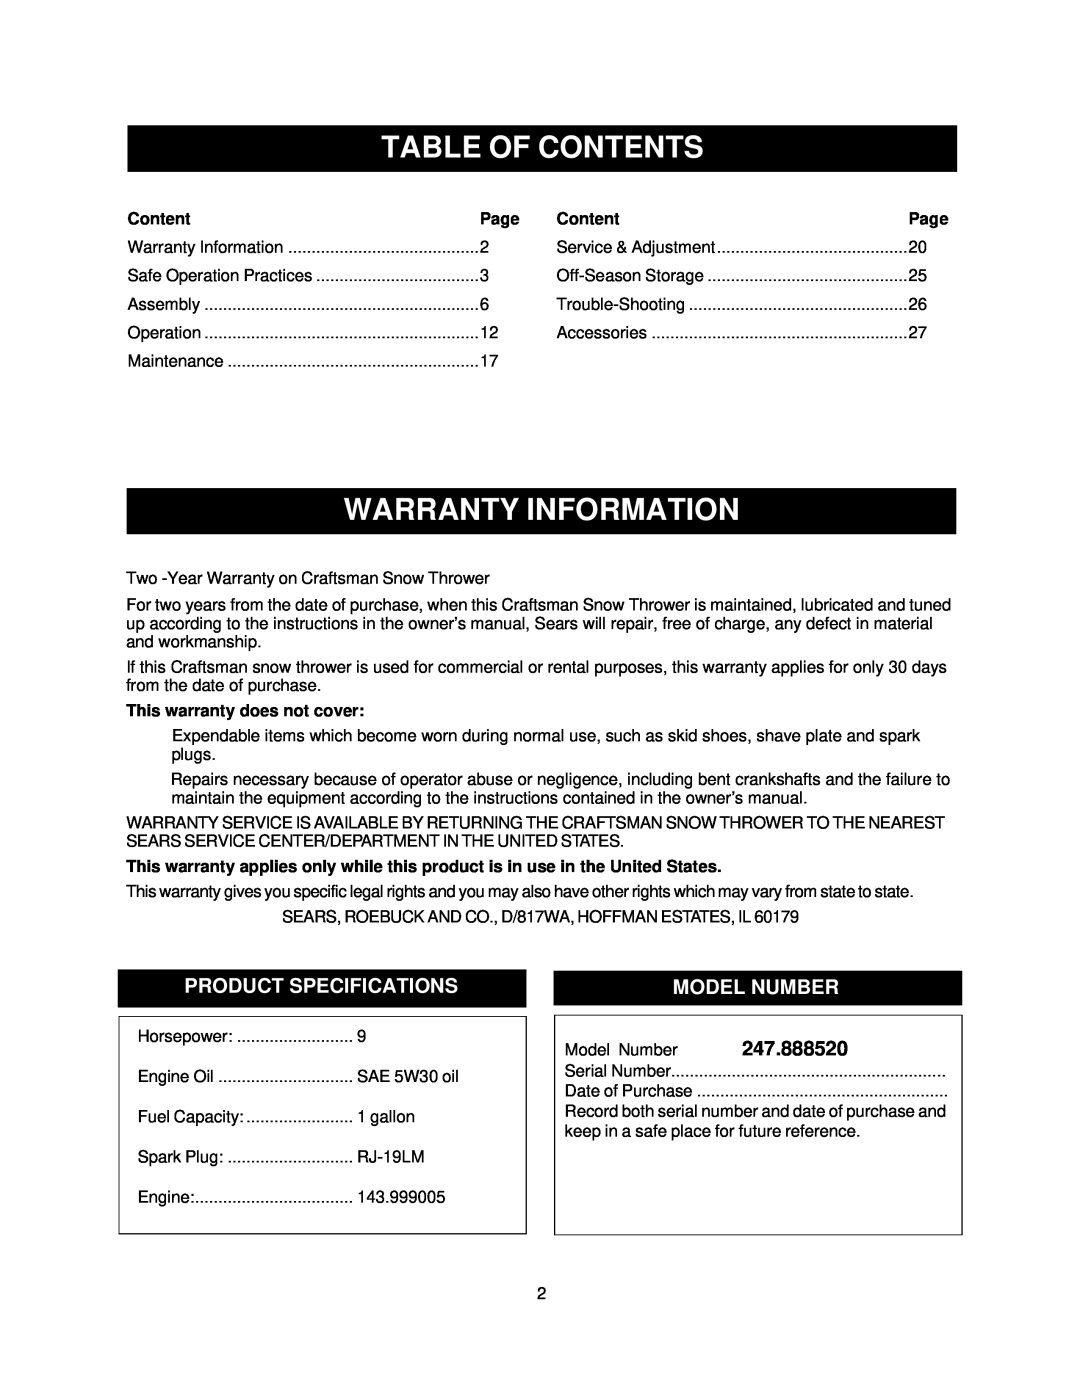 Sears owner manual Table Of Contents, Warranty Information, Product Specifications, Model Number, 247.888520, Page 